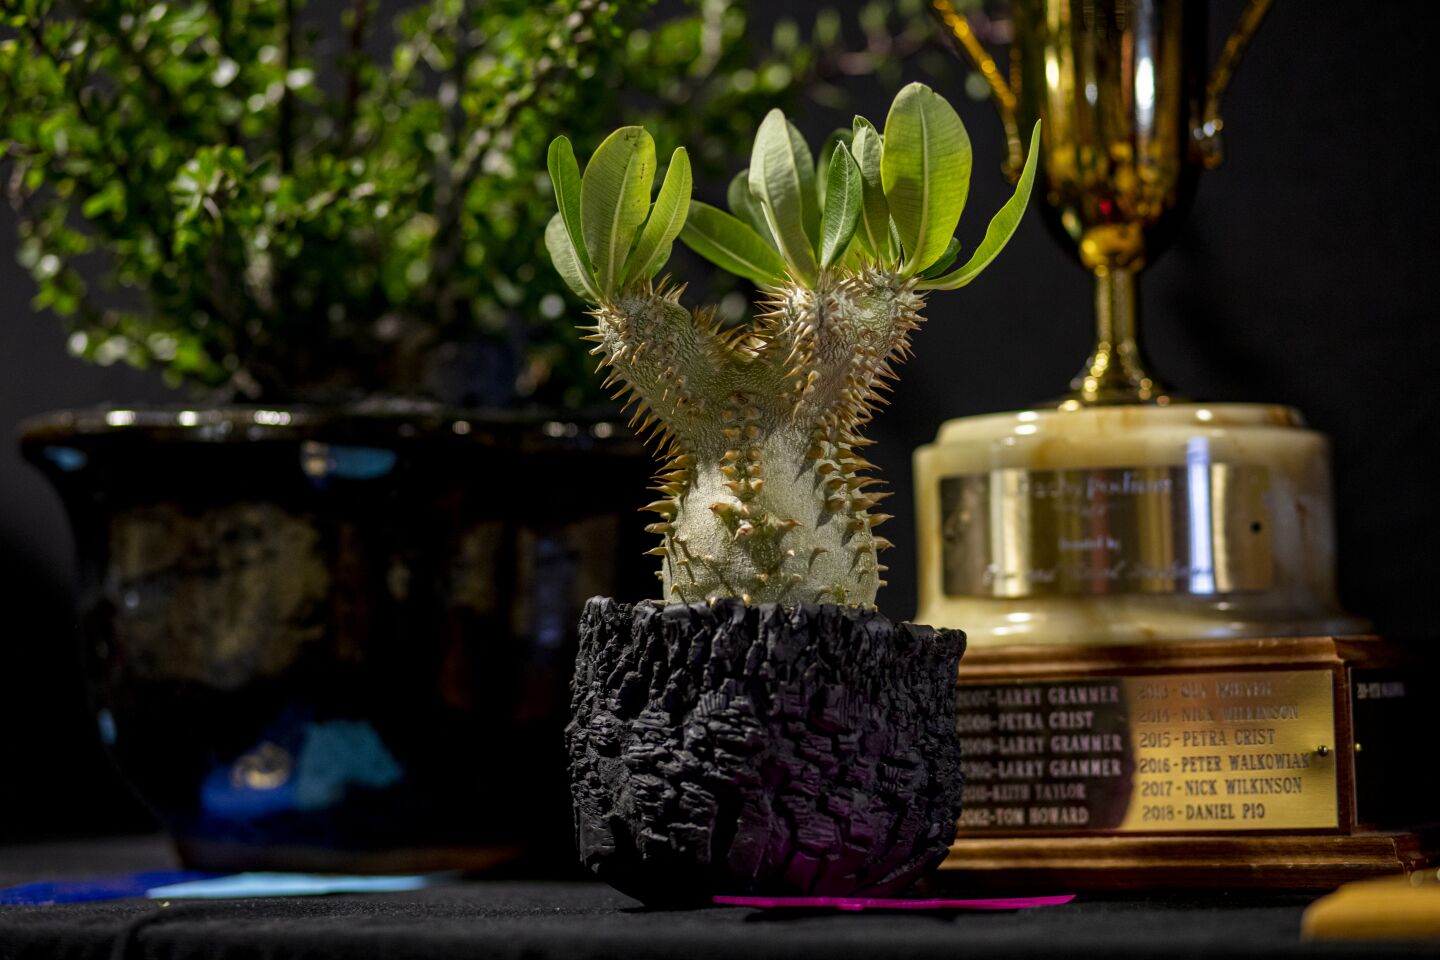 Andrew Toledo of North Hollywood's Pachypodium eburneum succulent, also known as a Madagascar palm, was one of the convention's trophy winners. It's a compact plant with tall white blooms, and is believed to be extinct in its native habitat in central Madagascar.